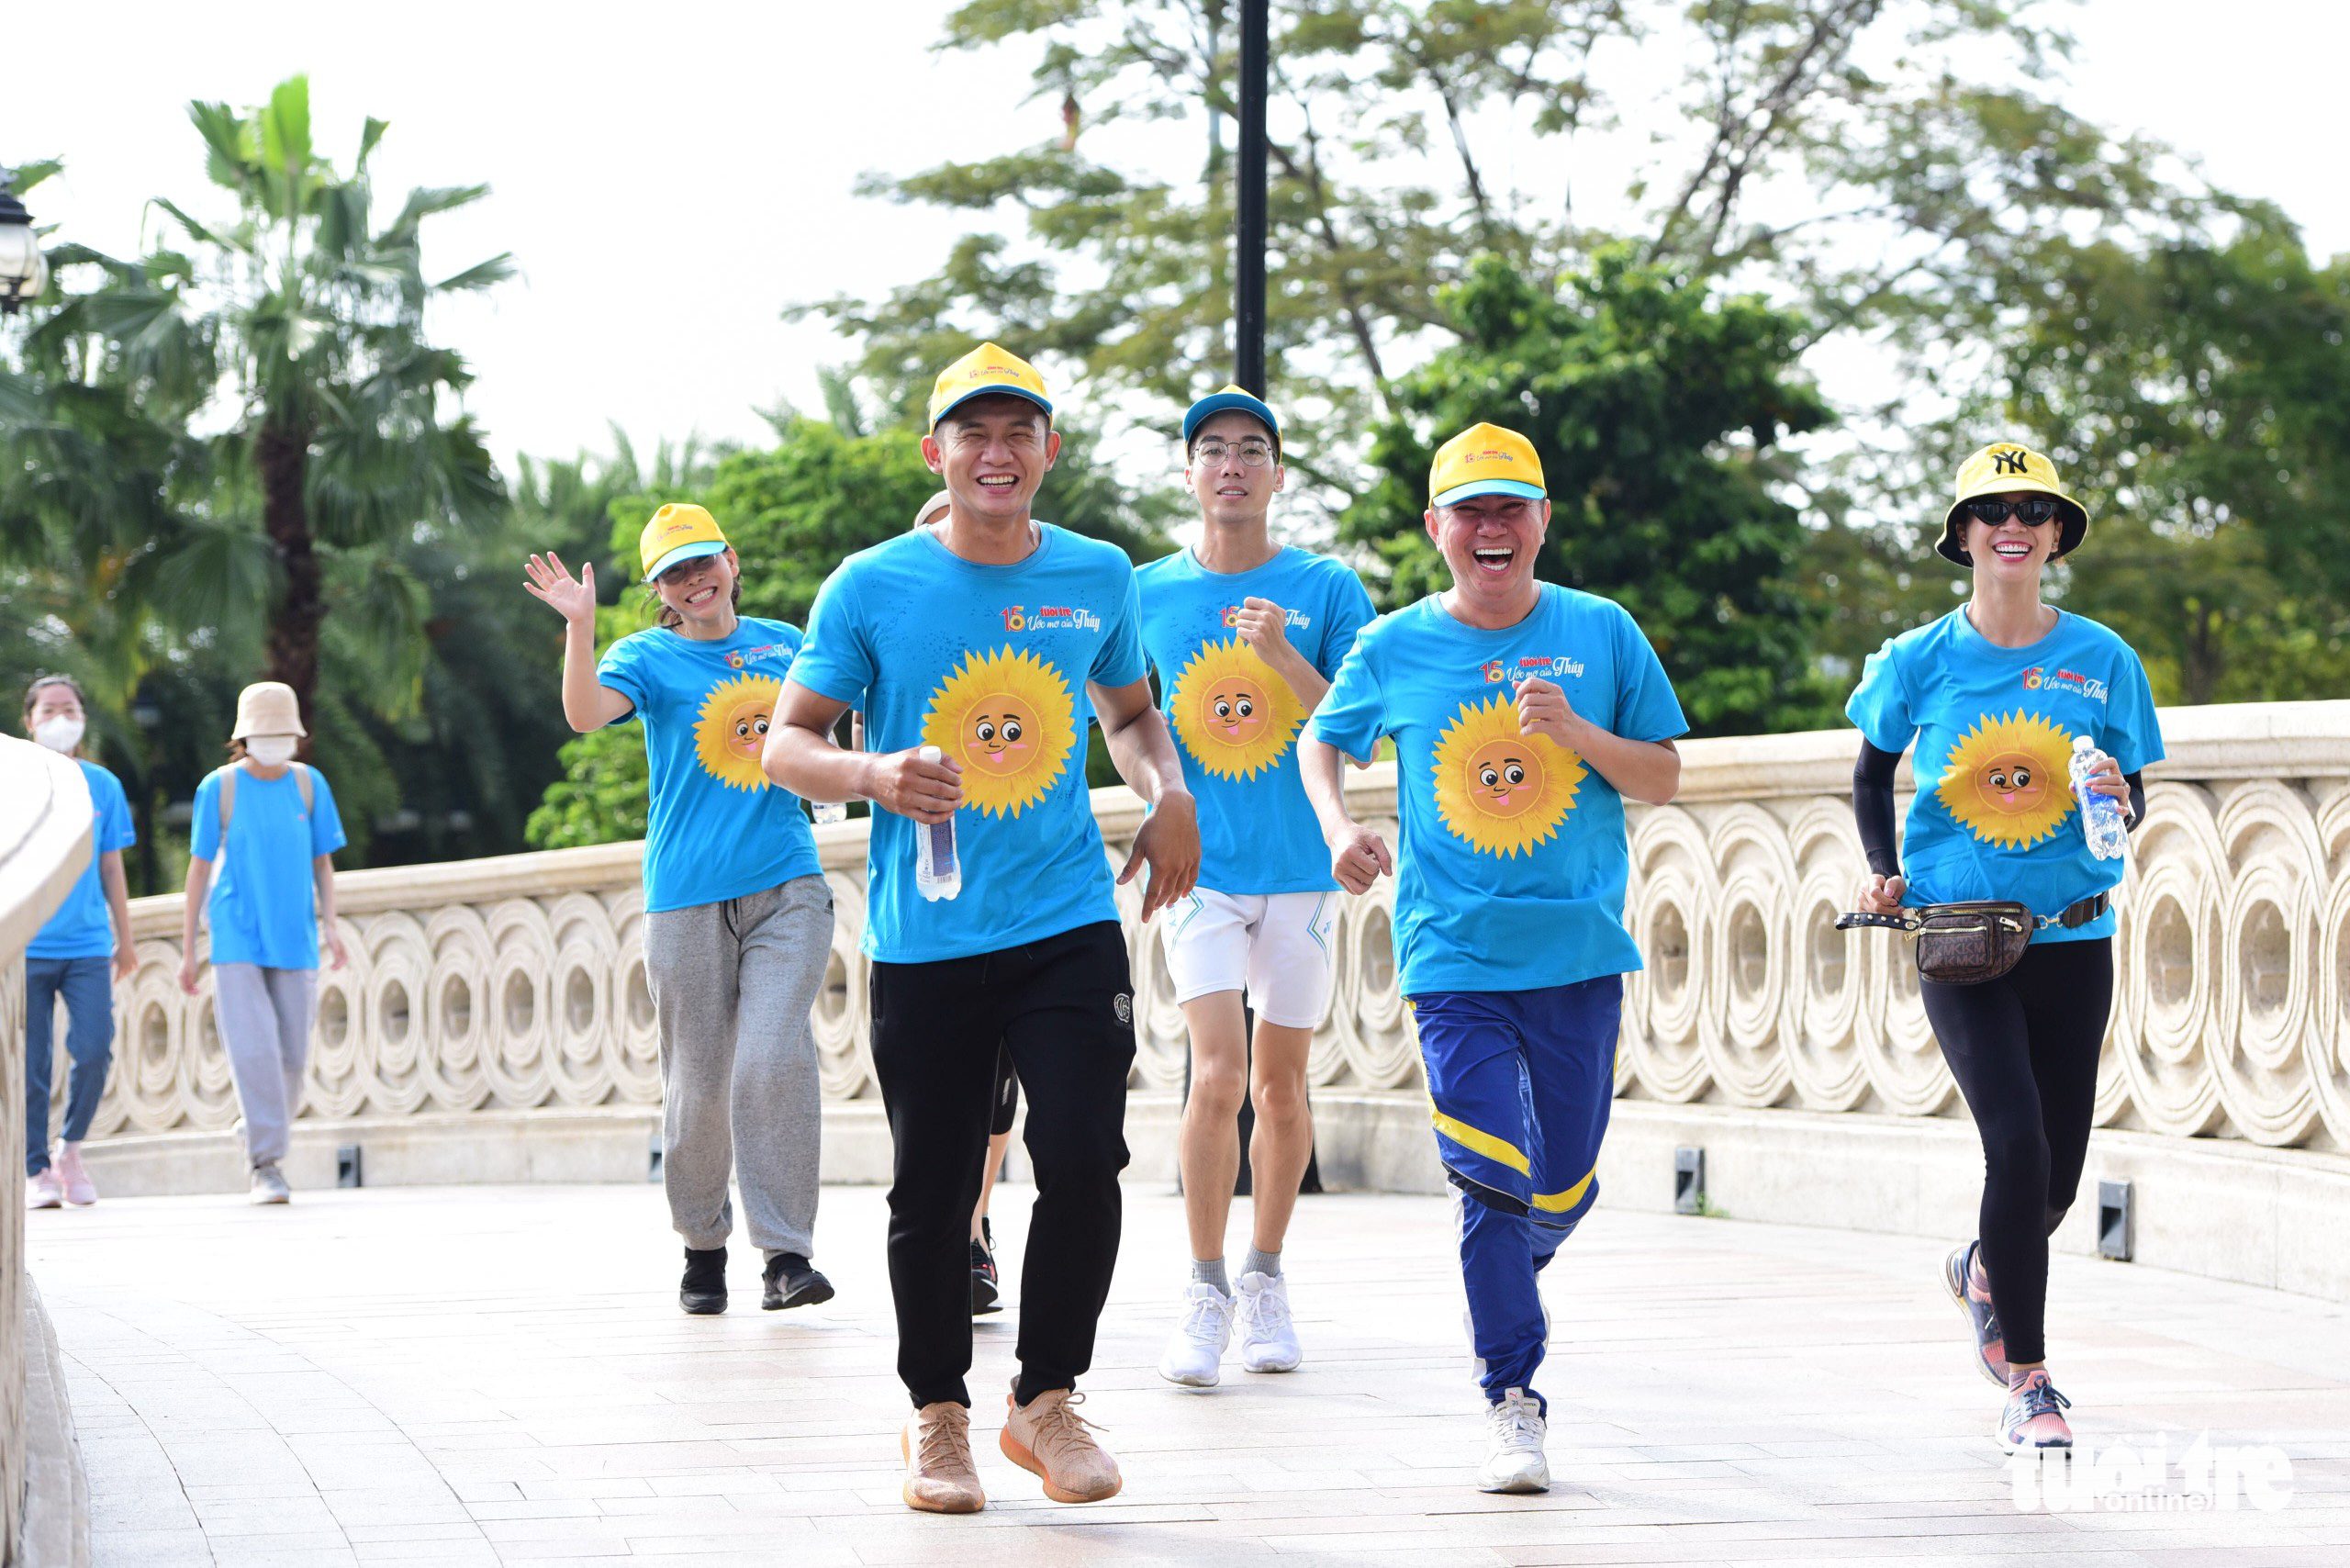 Participants pose for a photo at the Sunflower Marathon in Binh Thanh District, Ho Chi Minh City, May 22, 2022. Photo: Duyen Phan / Tuoi Tre